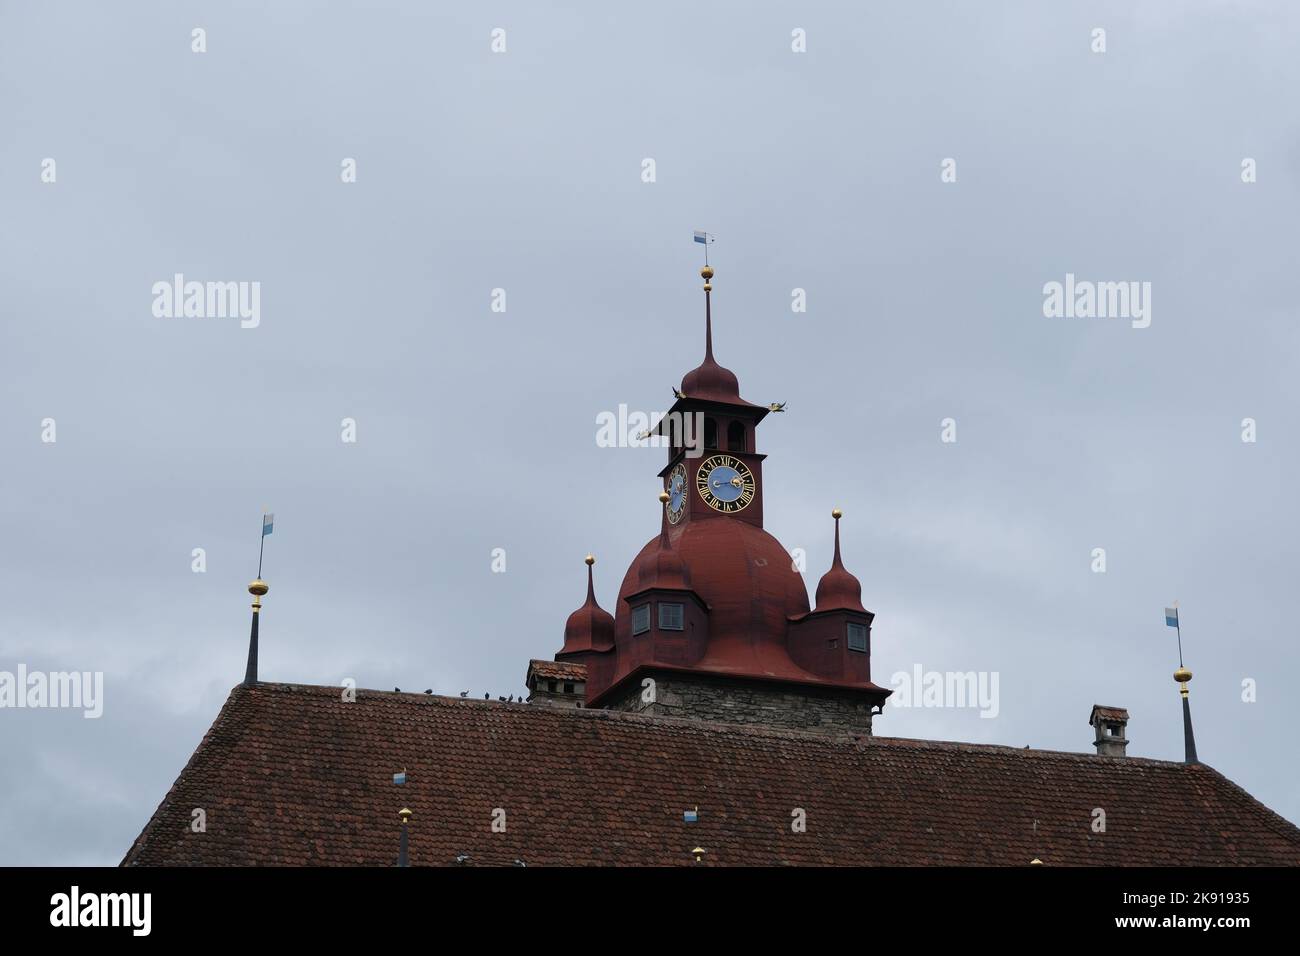 A scenic view dome of the Rathaus Stadt Luzern governmental building in Switzerland Stock Photo